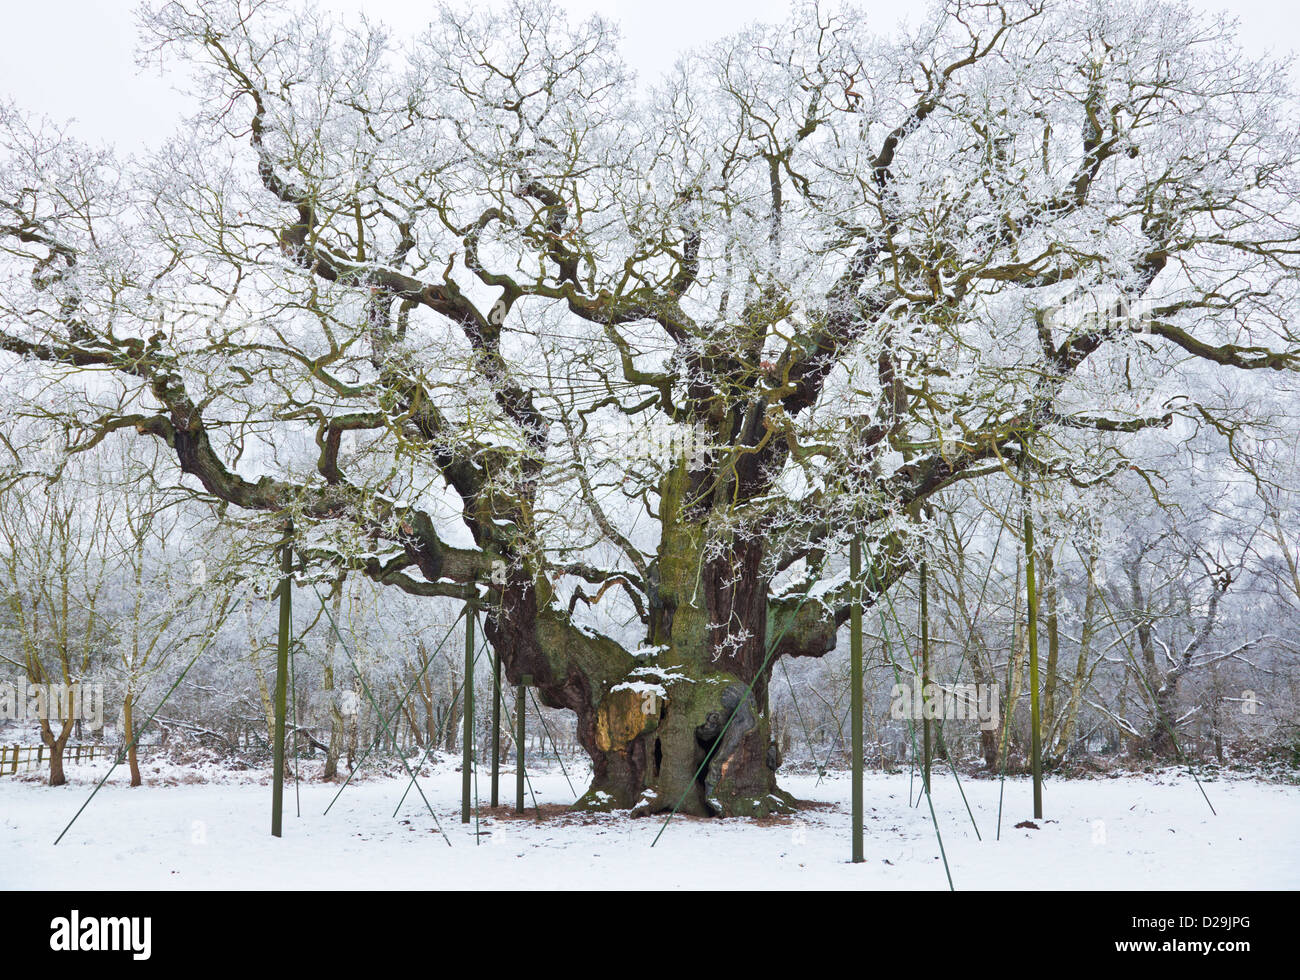 the major oak tree in the fresh snow sherwood forest country park edwinstowe Stock Photo